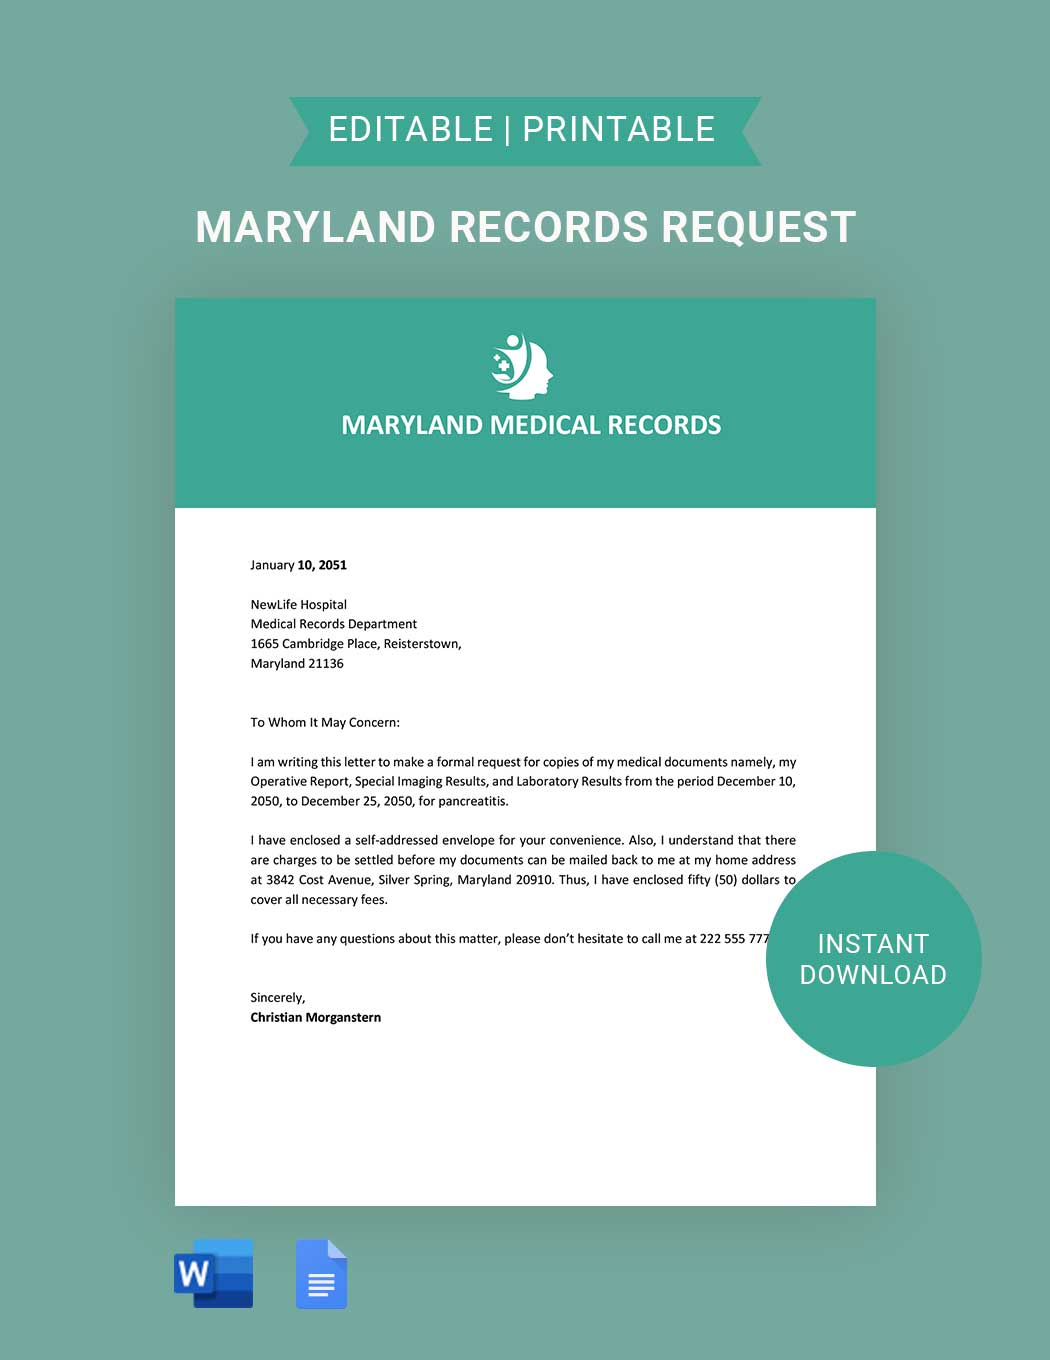 Maryland Medical Records Request Template in Word, Google Docs